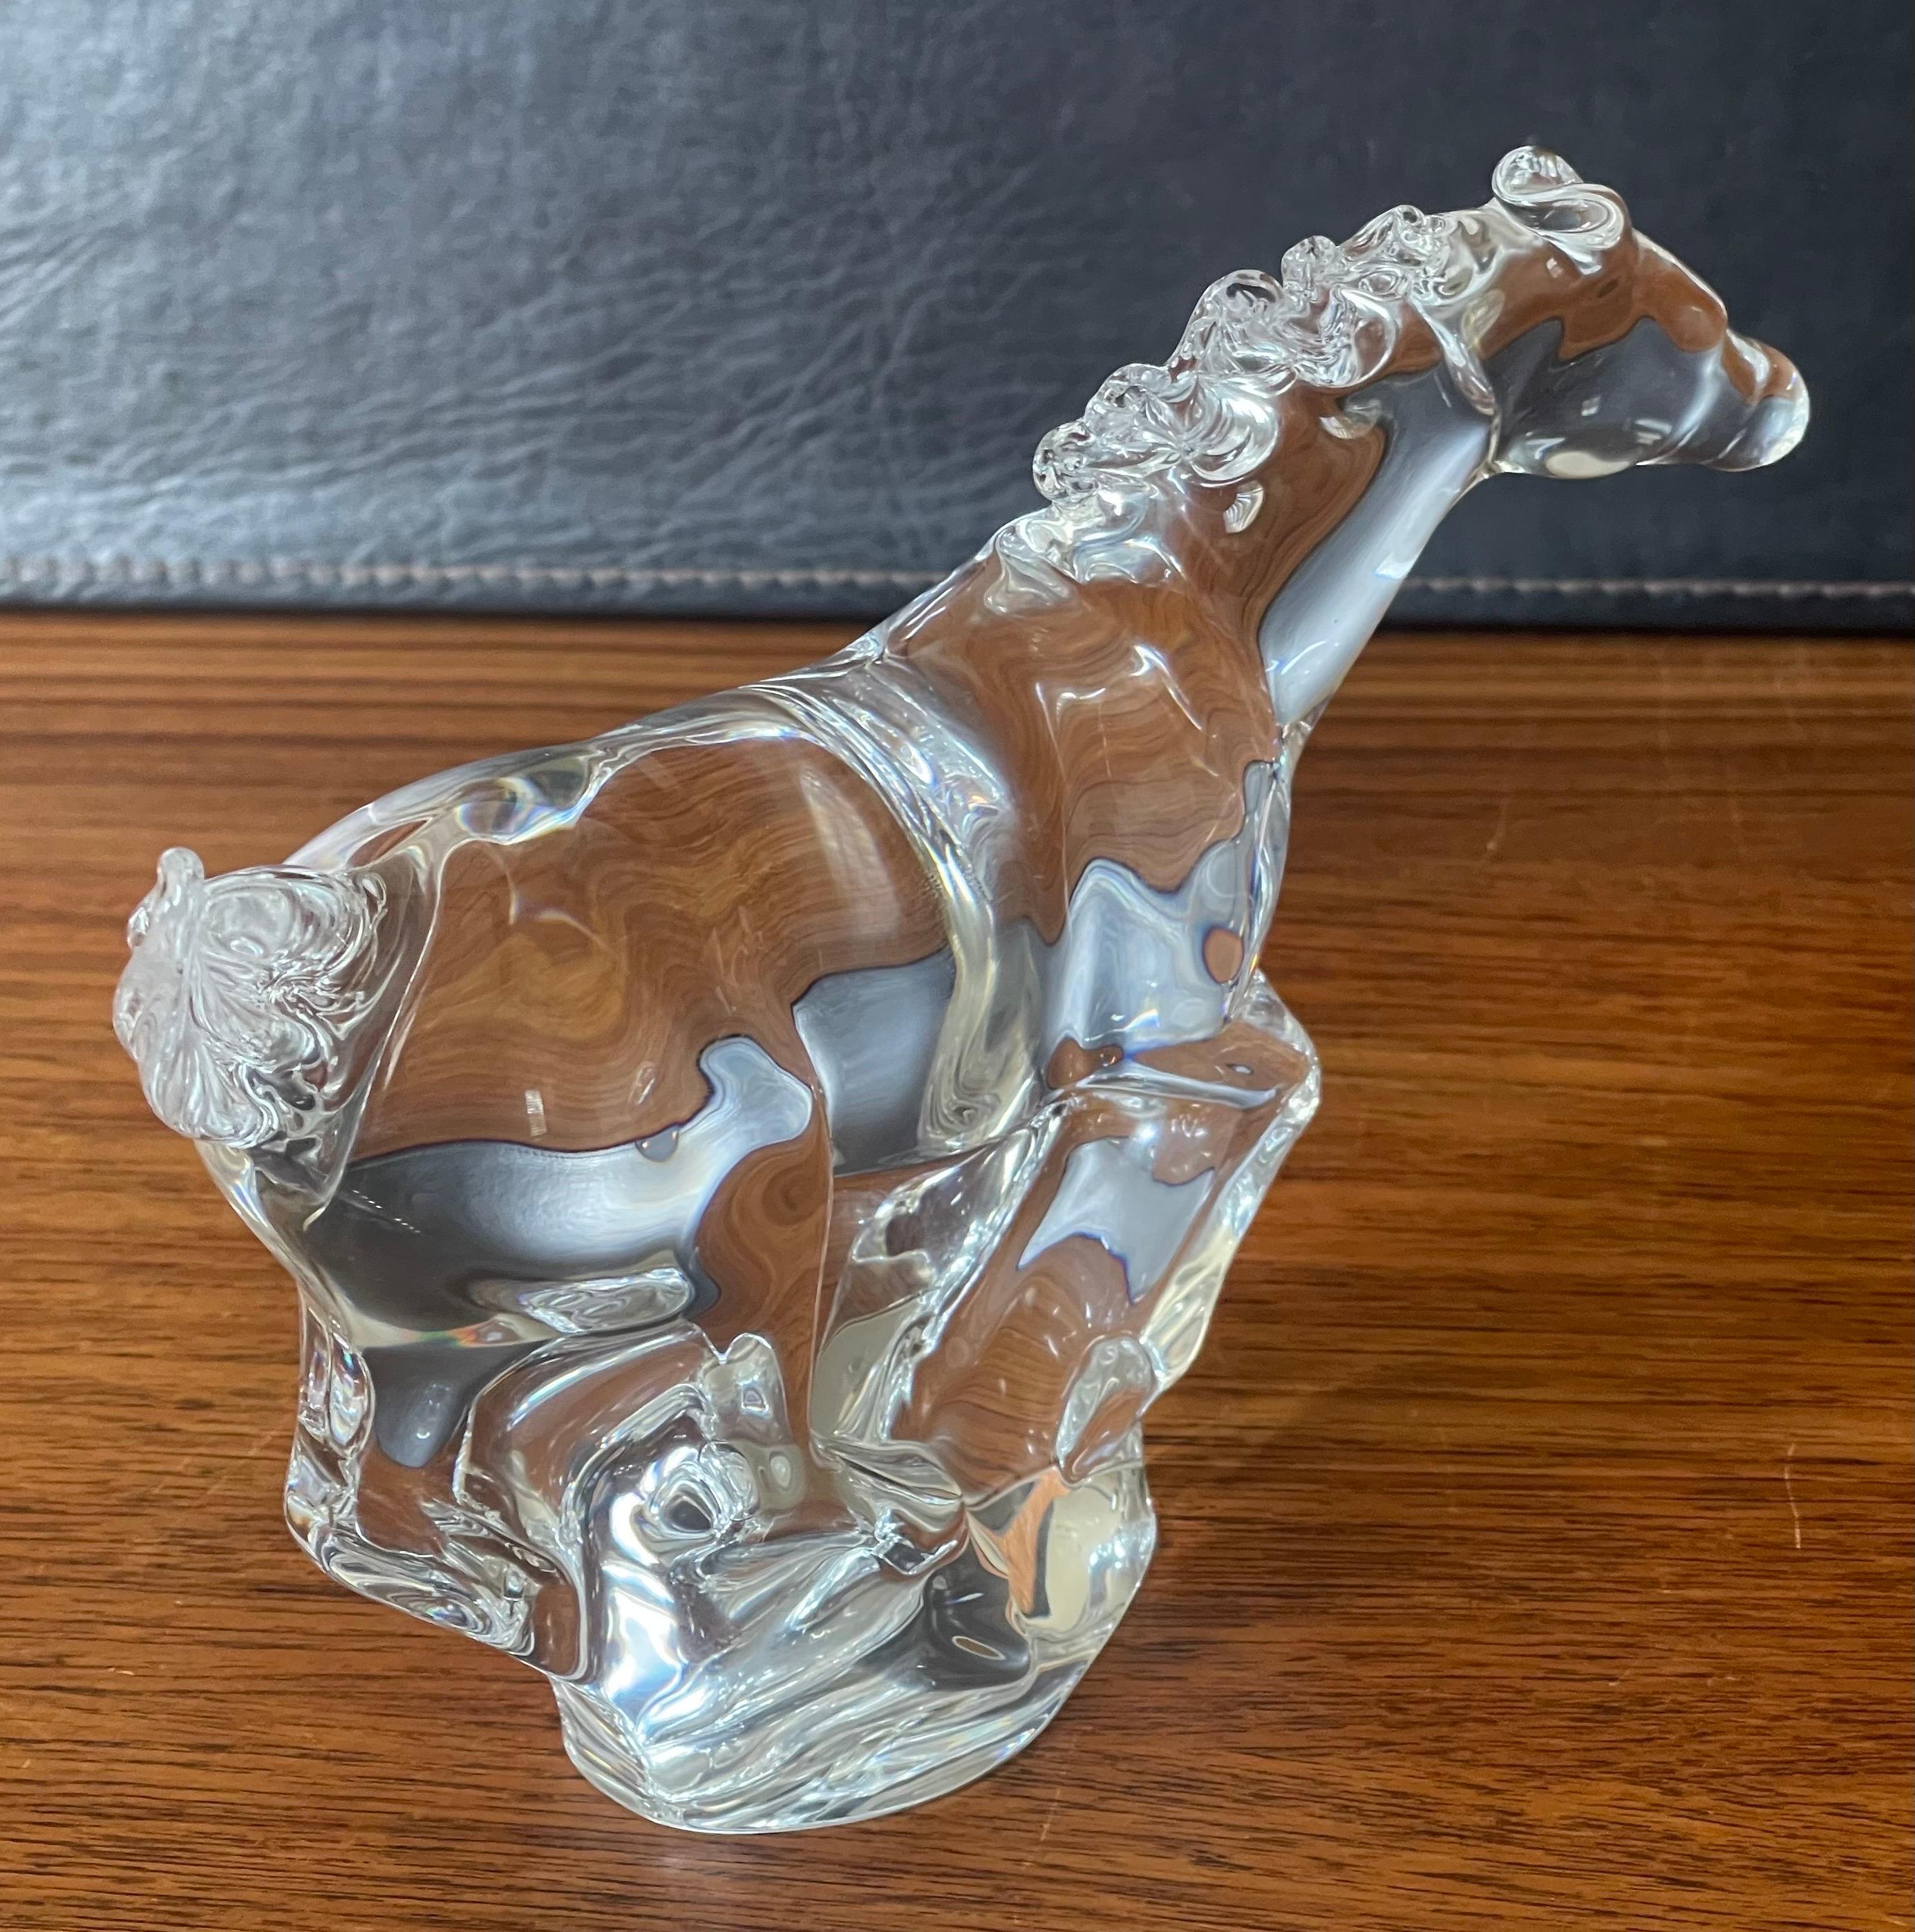 Crystal Galloping Horse / Mustang Sculpture by Steuben Glassworks For Sale 3